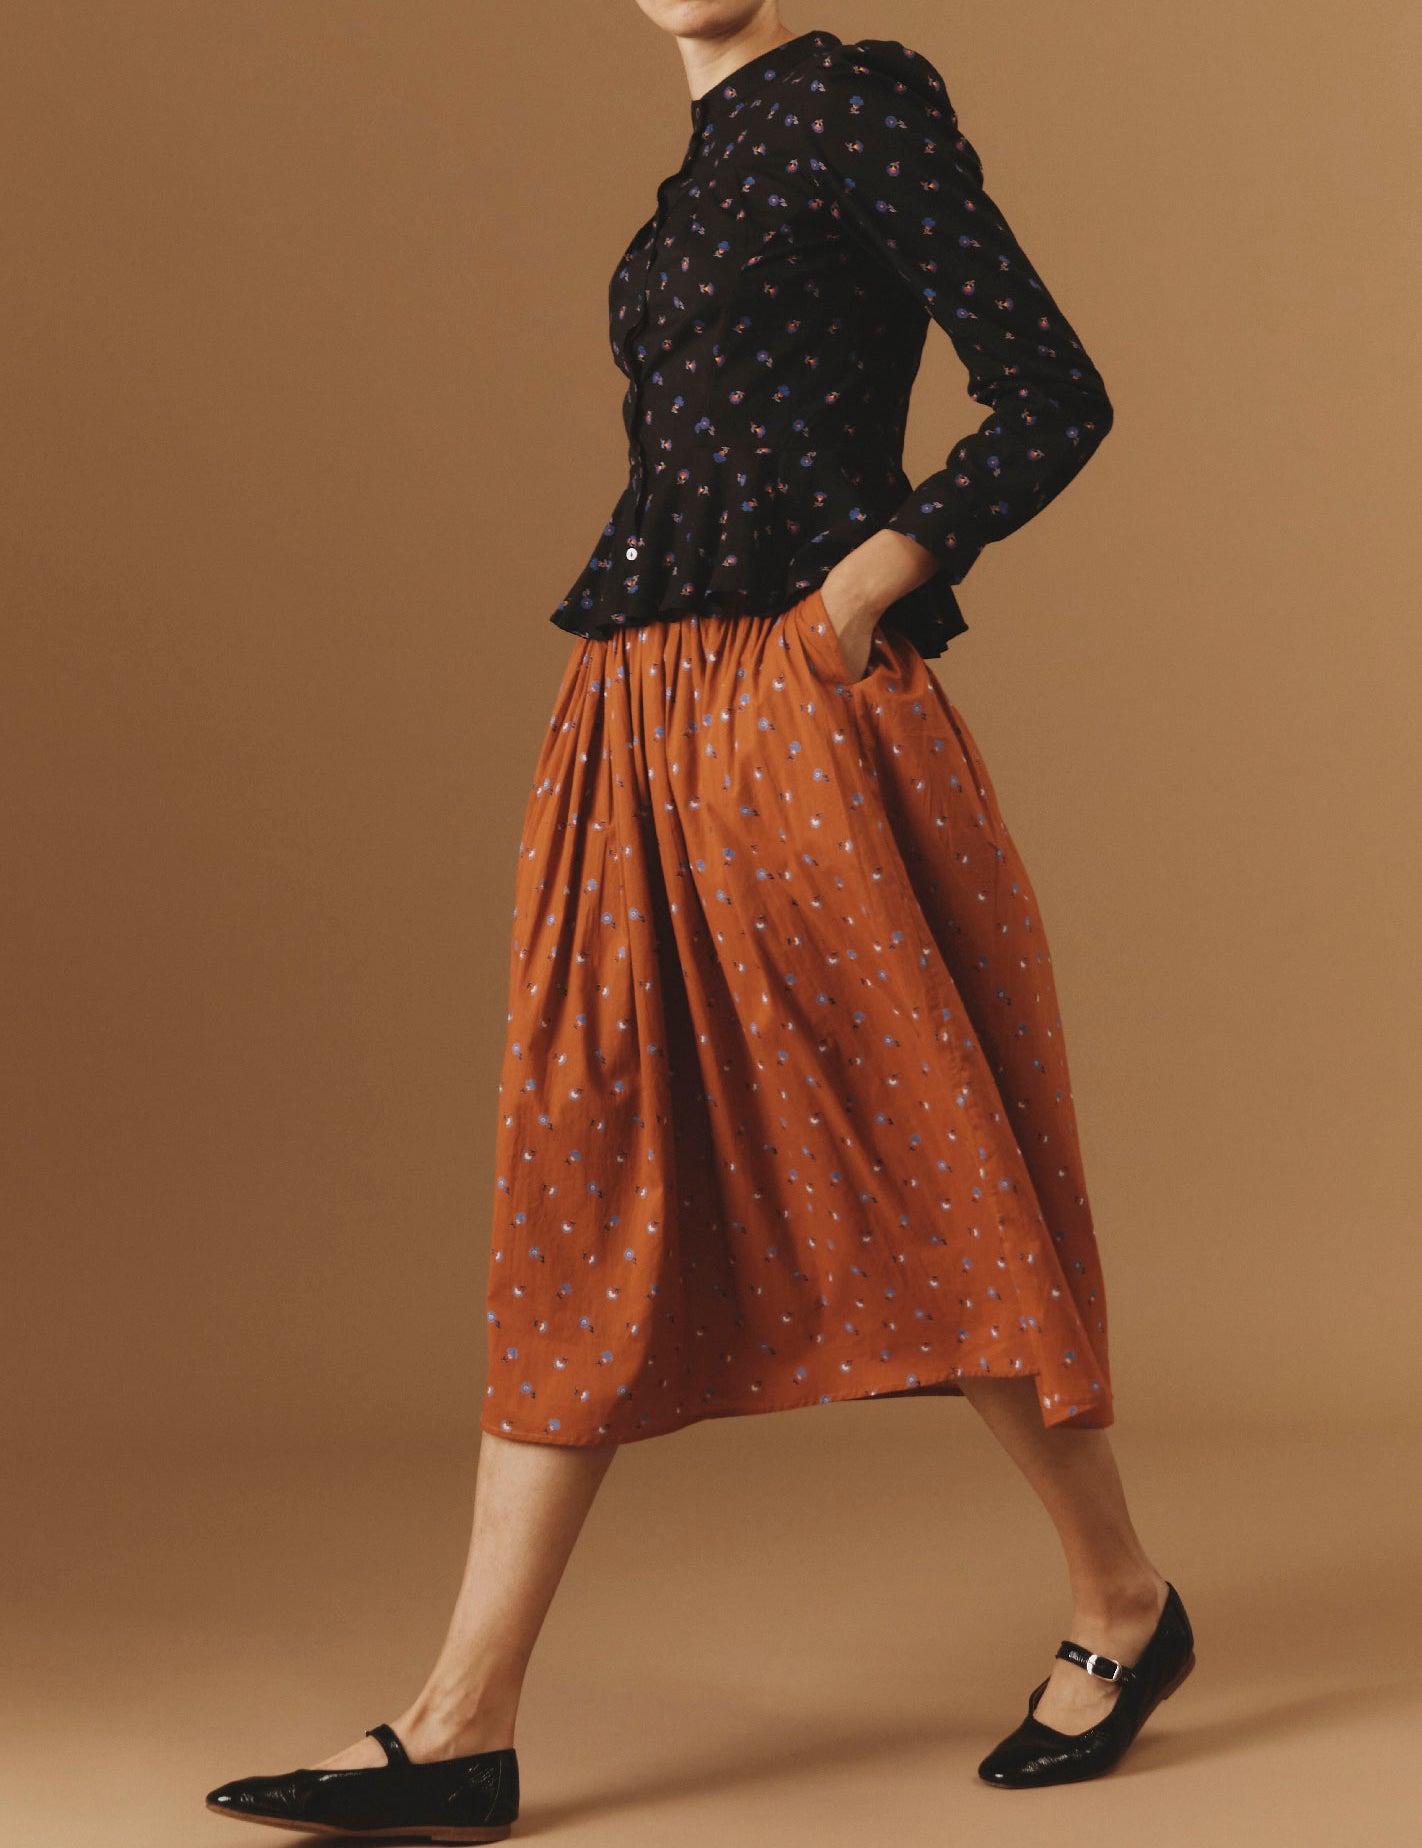 Alix Black Carnation Print Blouse with Verde Orange Skirt  by Thierry Colson - Pre Spring